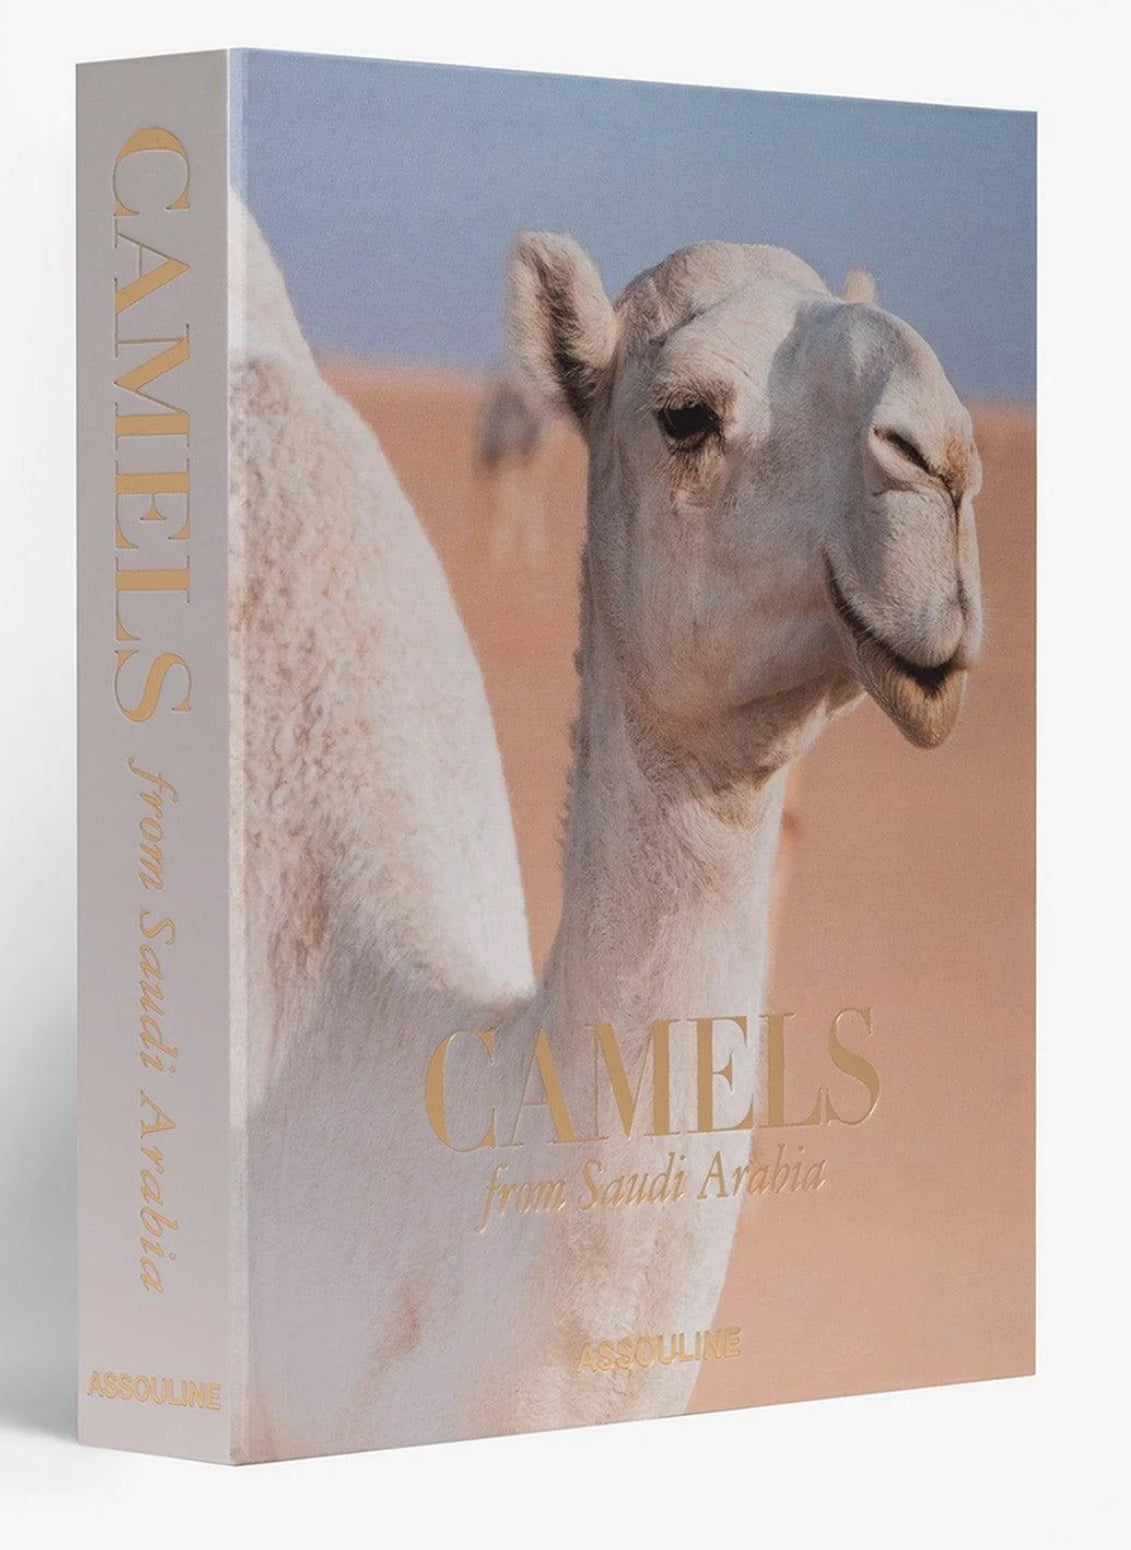 Camels from Saudi Arabia